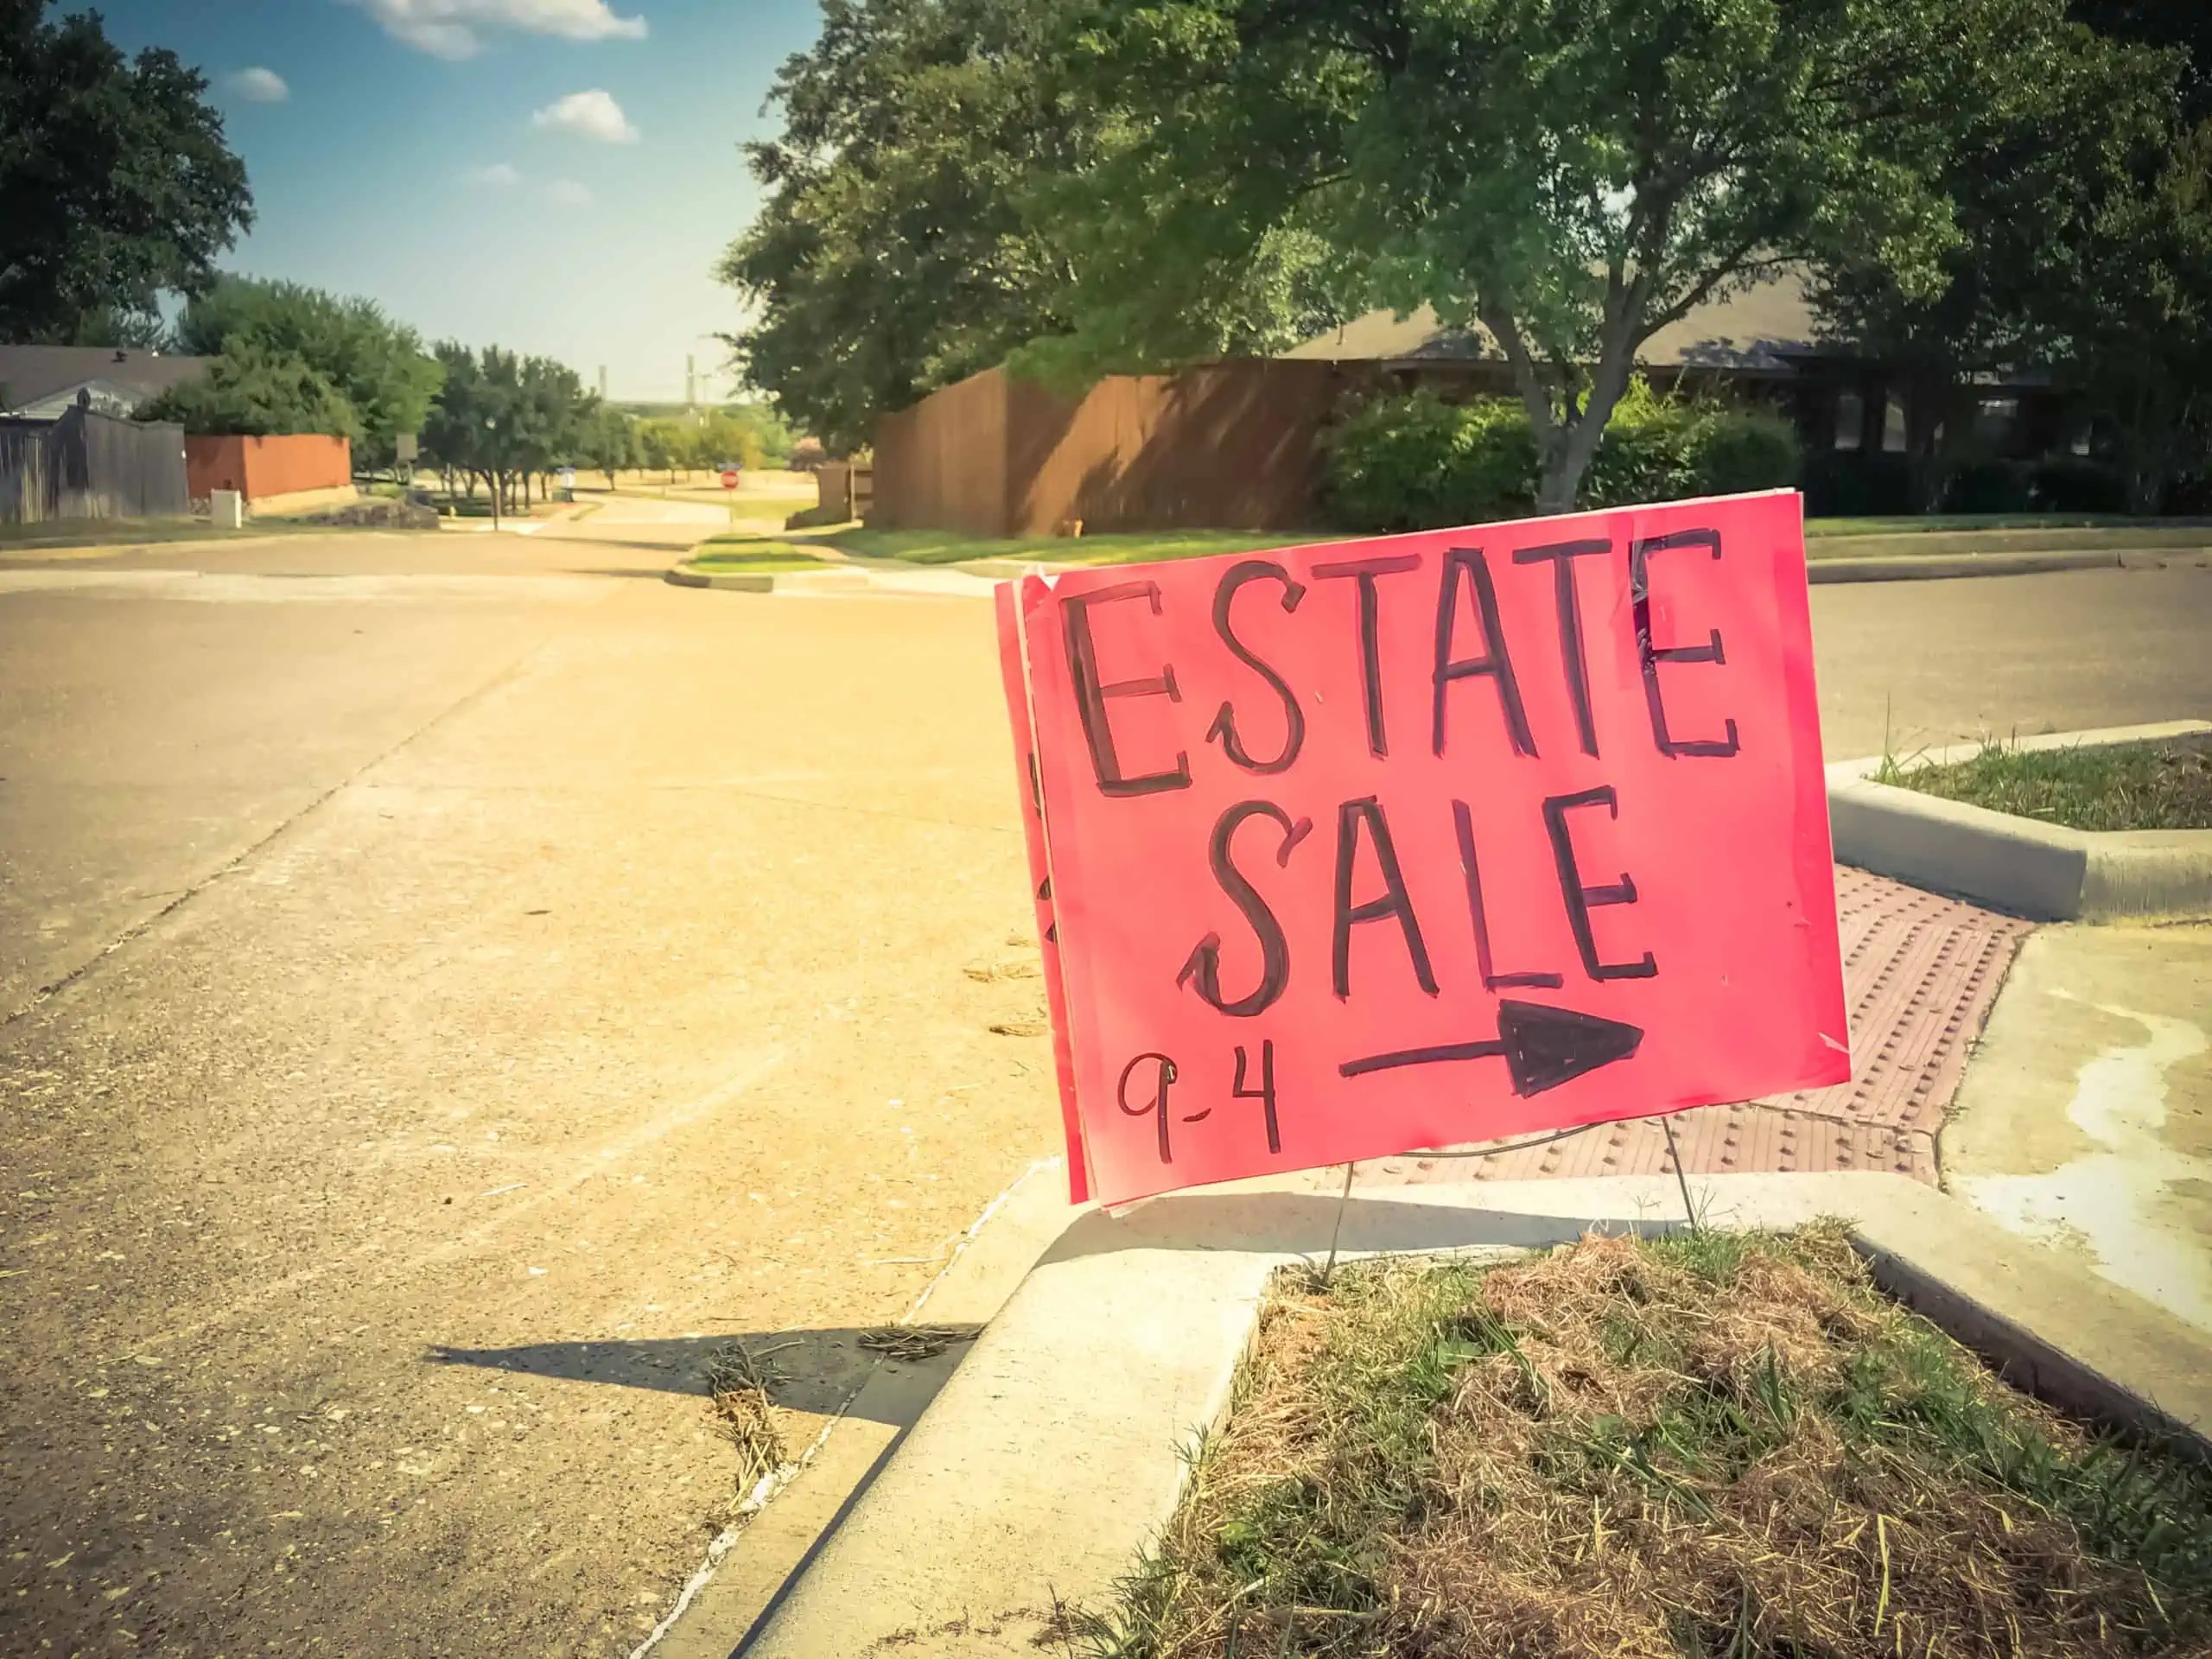 Estate sale sign; an opportunity to purchase items to flip when building wealth.